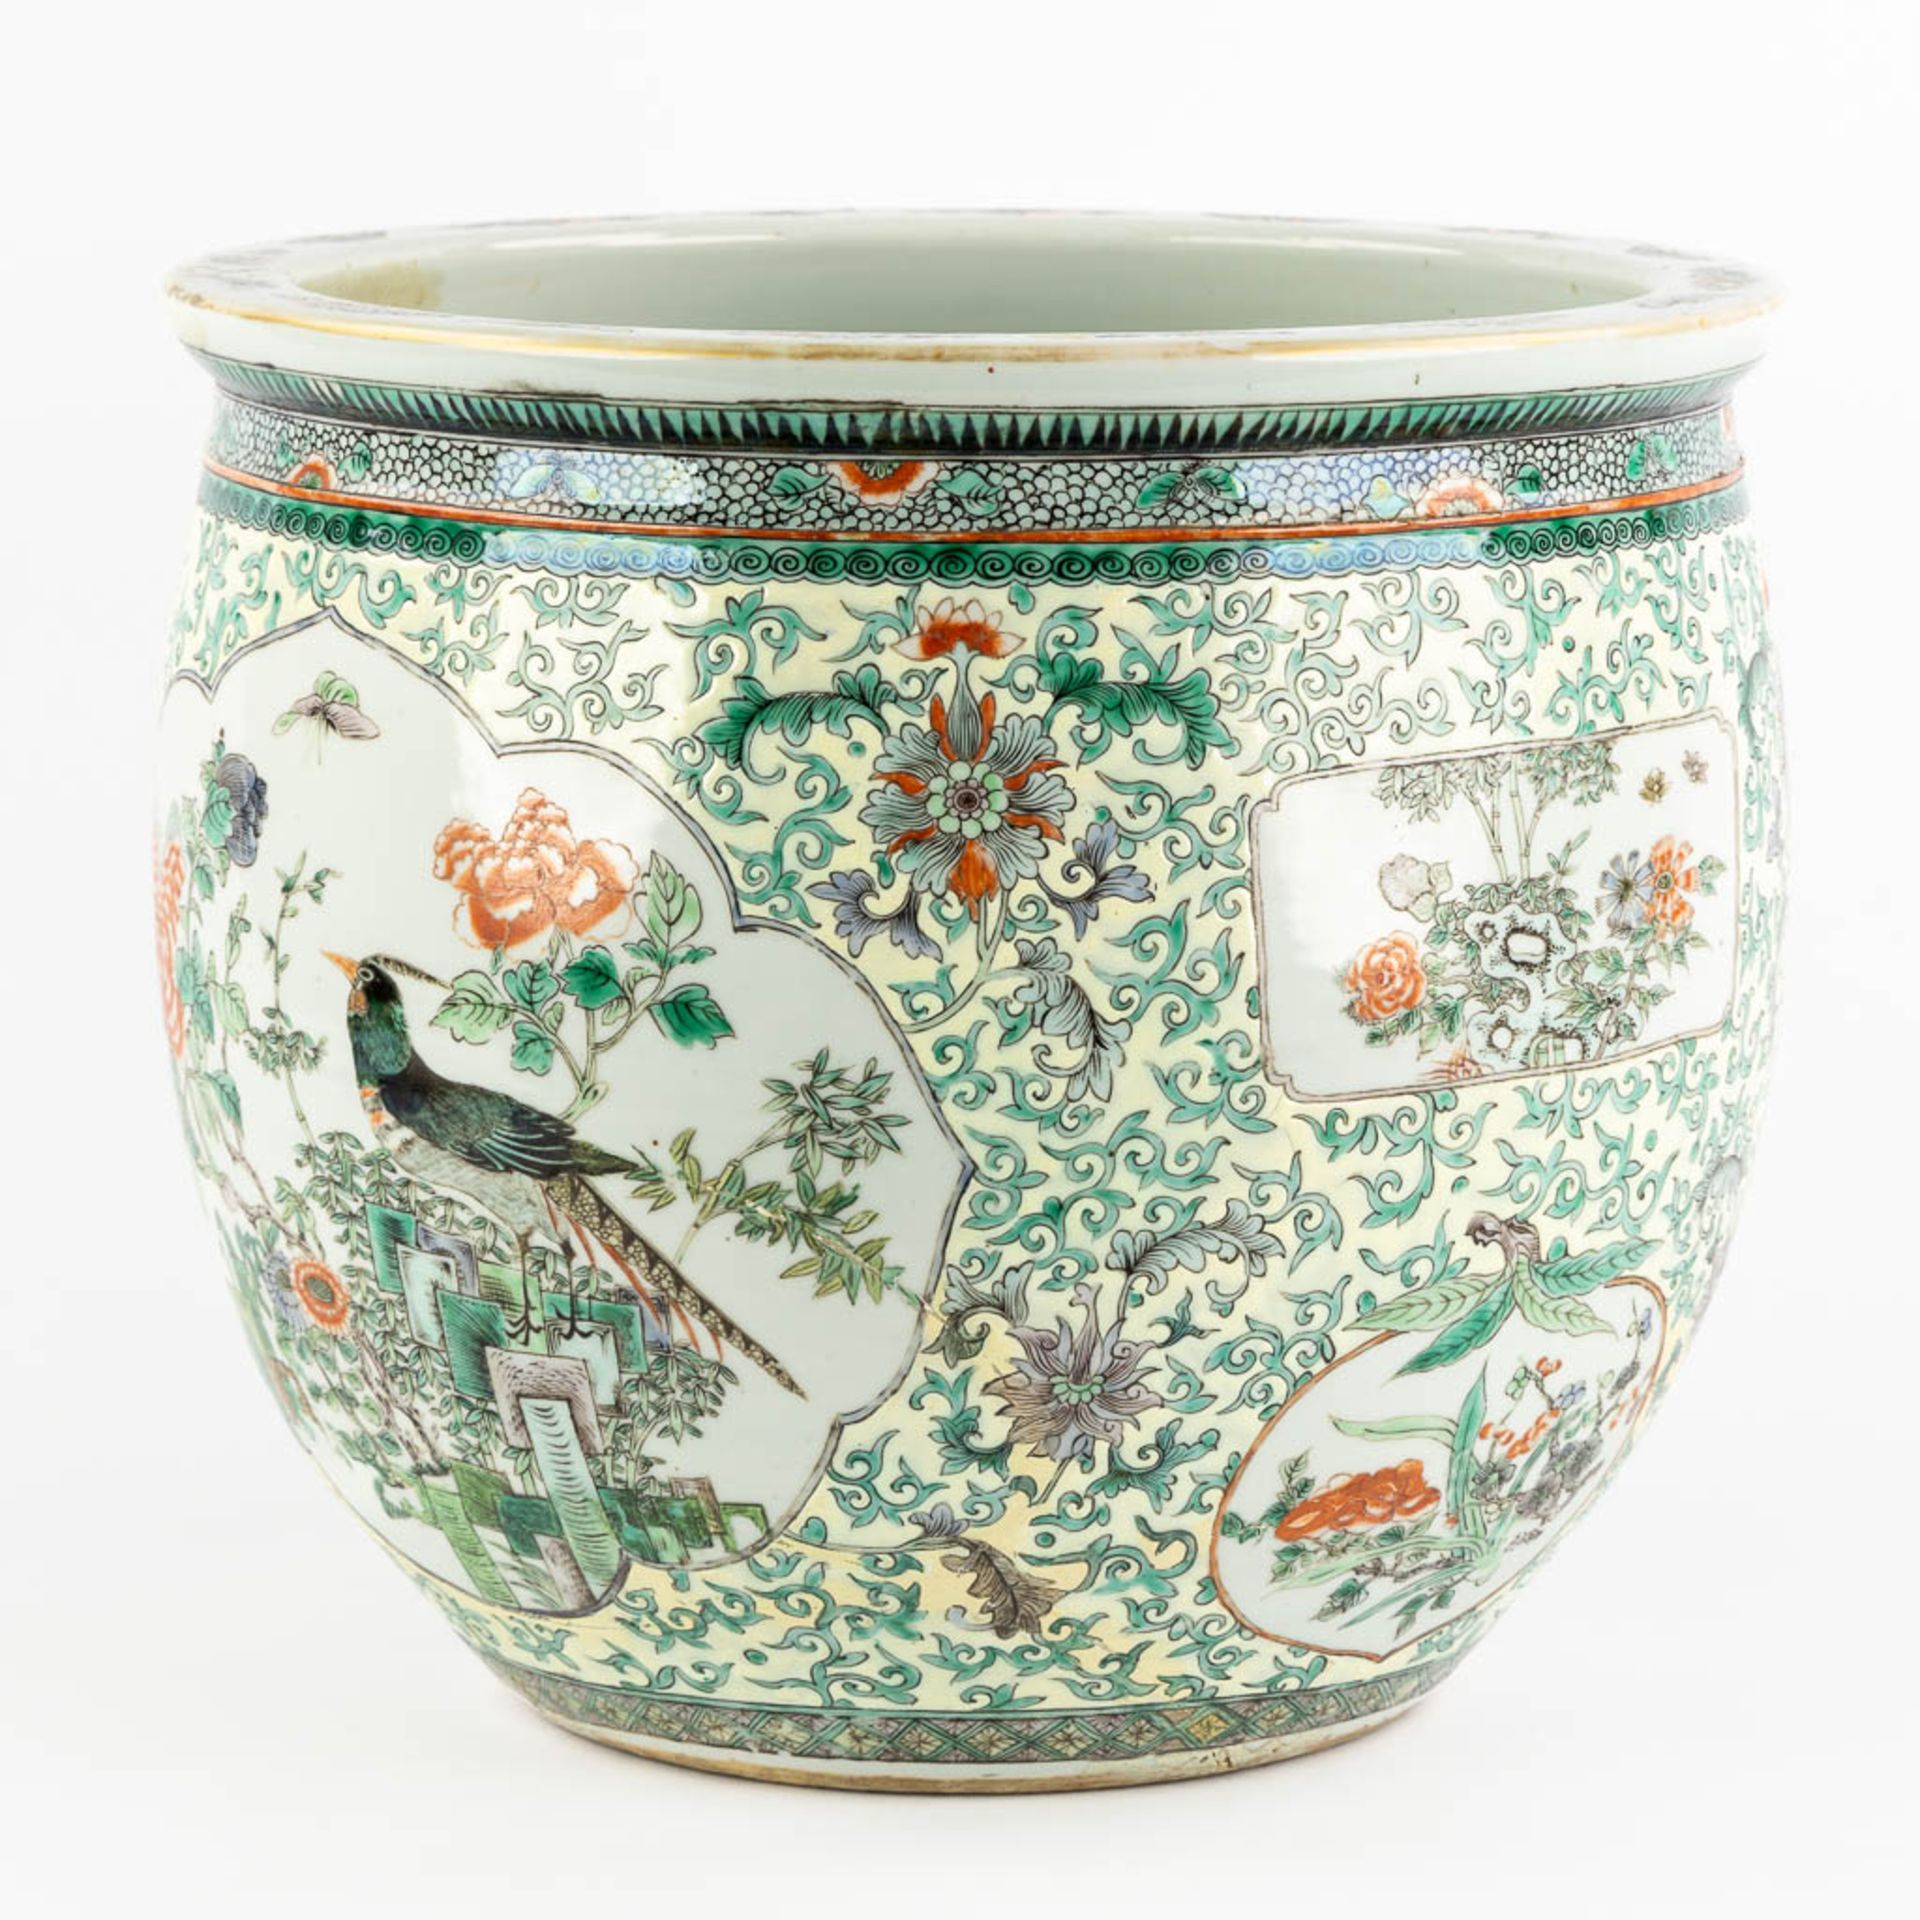 A Large Chinese Cache-Pot, Famille Verte decorated with fauna and flora. 19th C. (H:35 x D:40 cm) - Bild 3 aus 14